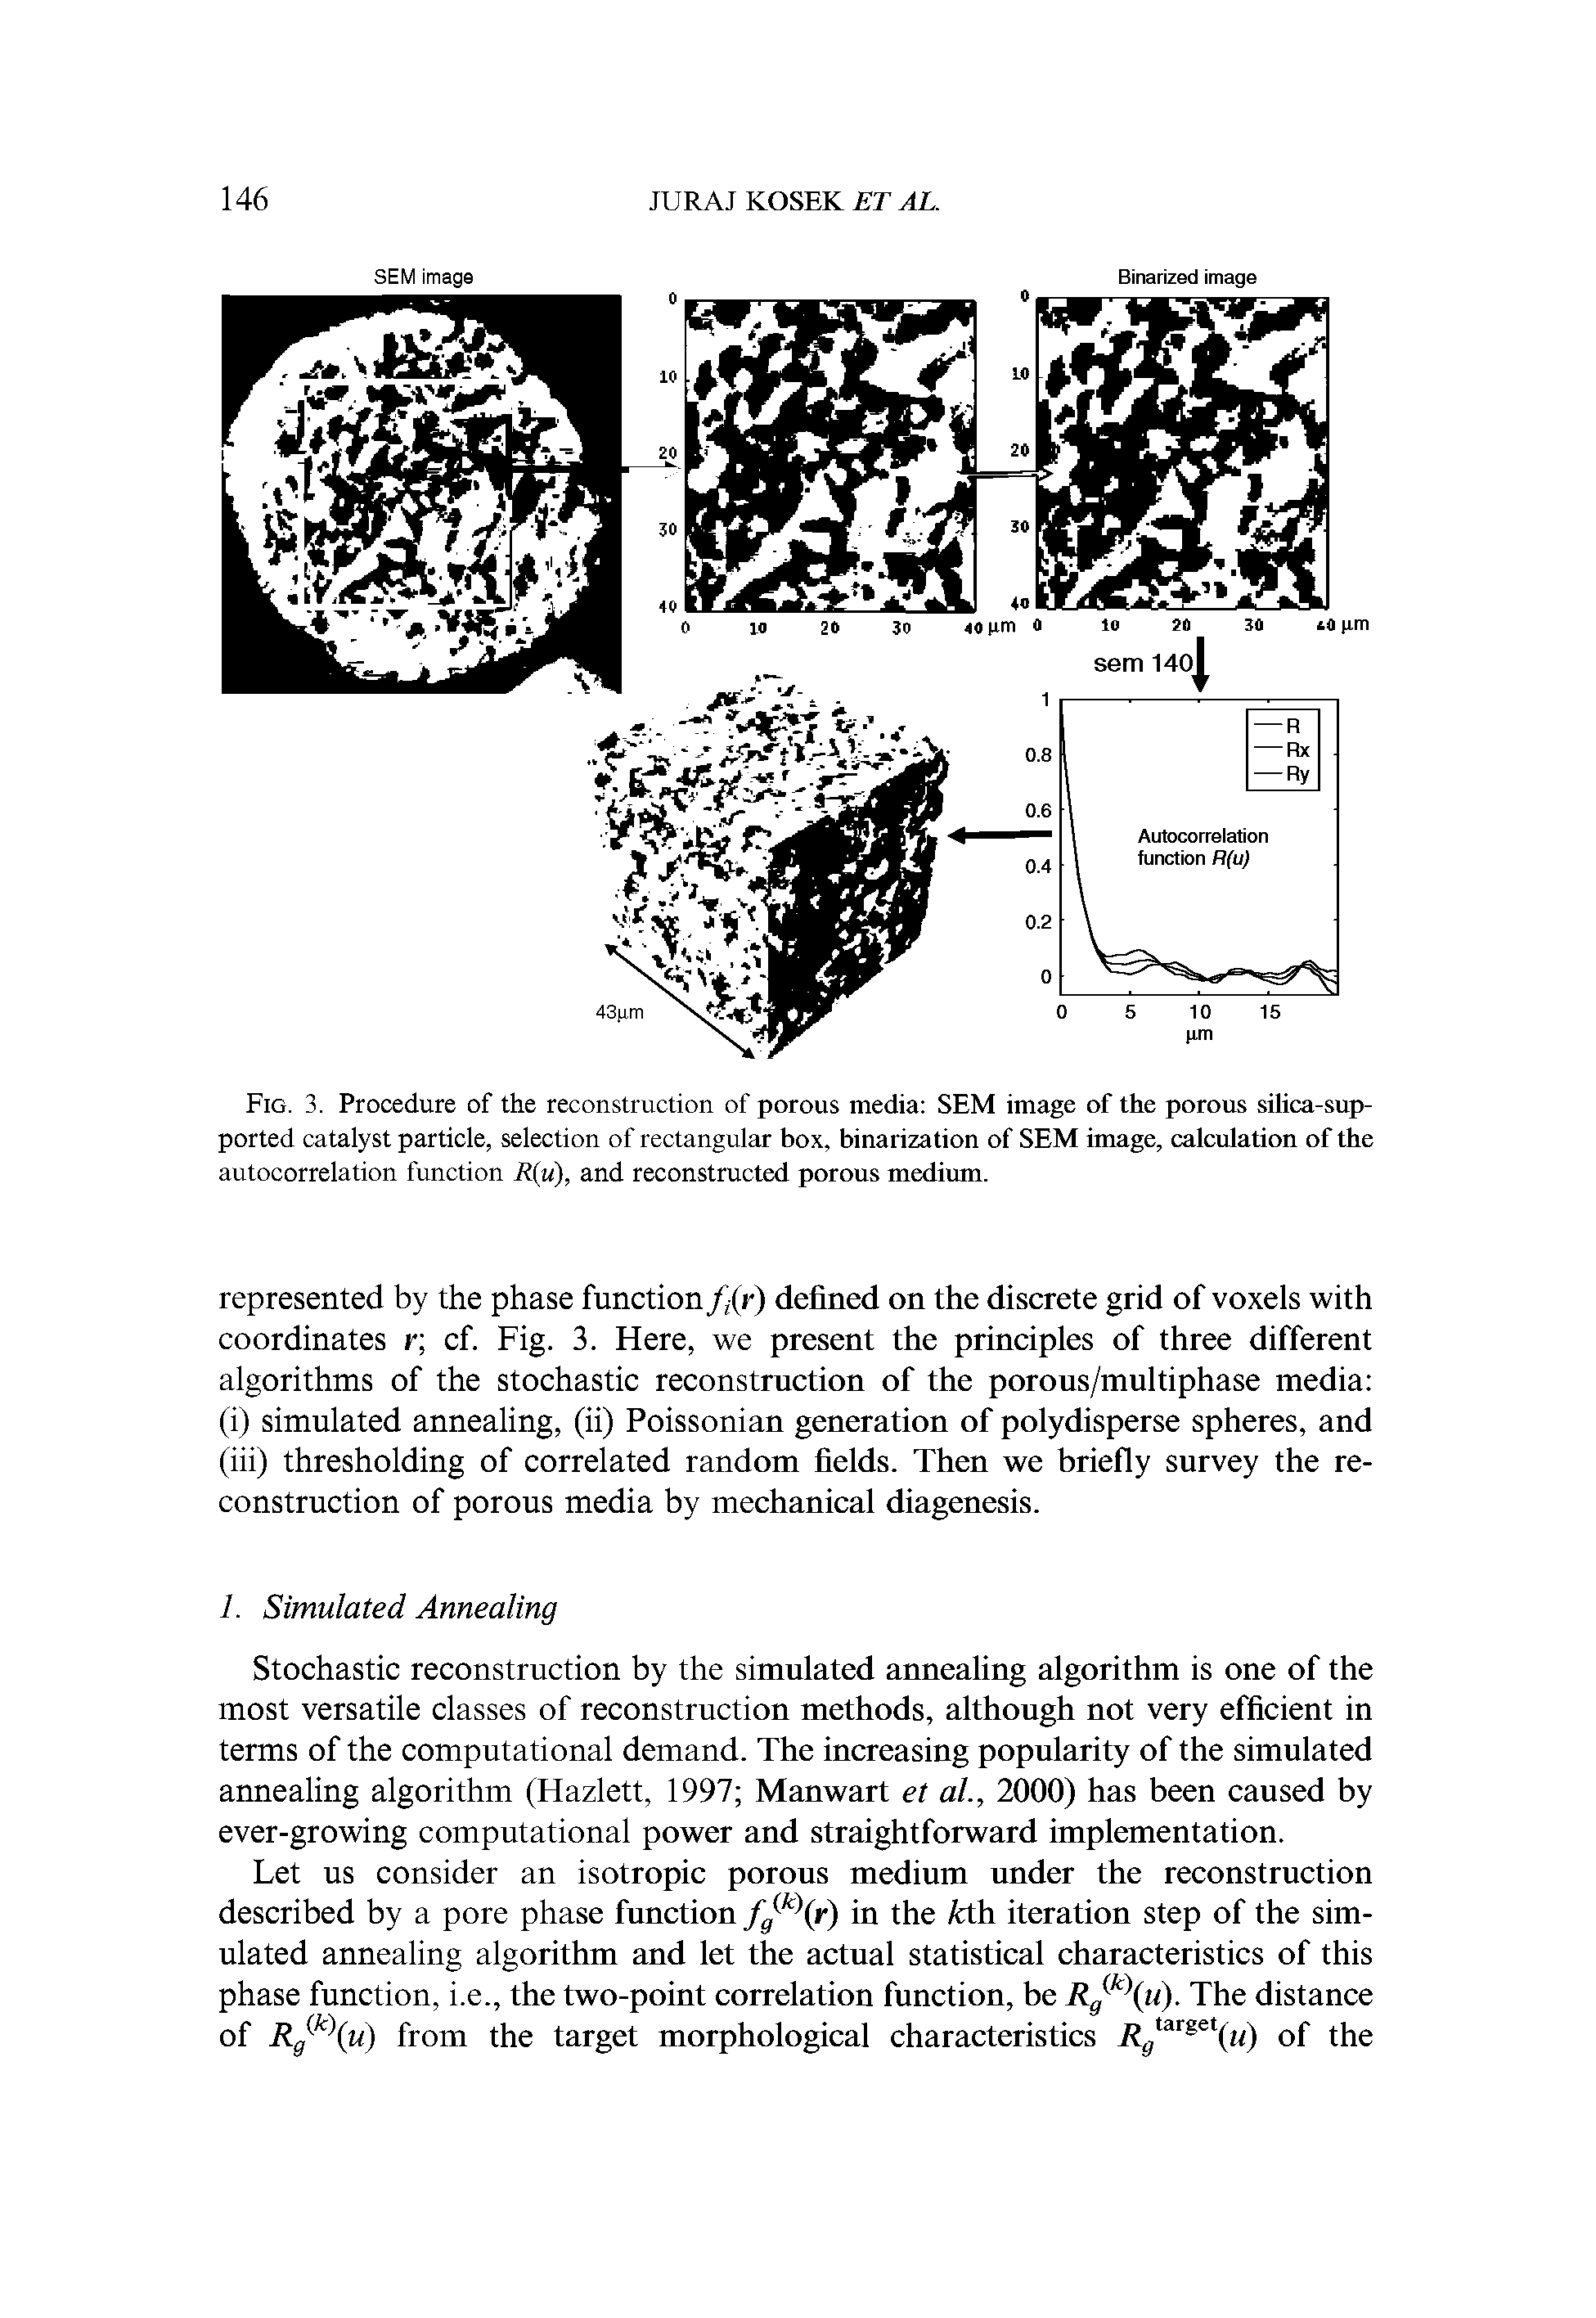 Fig. 3. Procedure of the reconstruction of porous media SEM image of the porous silica-sup-ported catalyst particle, selection of rectangular box, binarization of SEM image, calculation of the autocorrelation function Mu), and reconstructed porous medium.